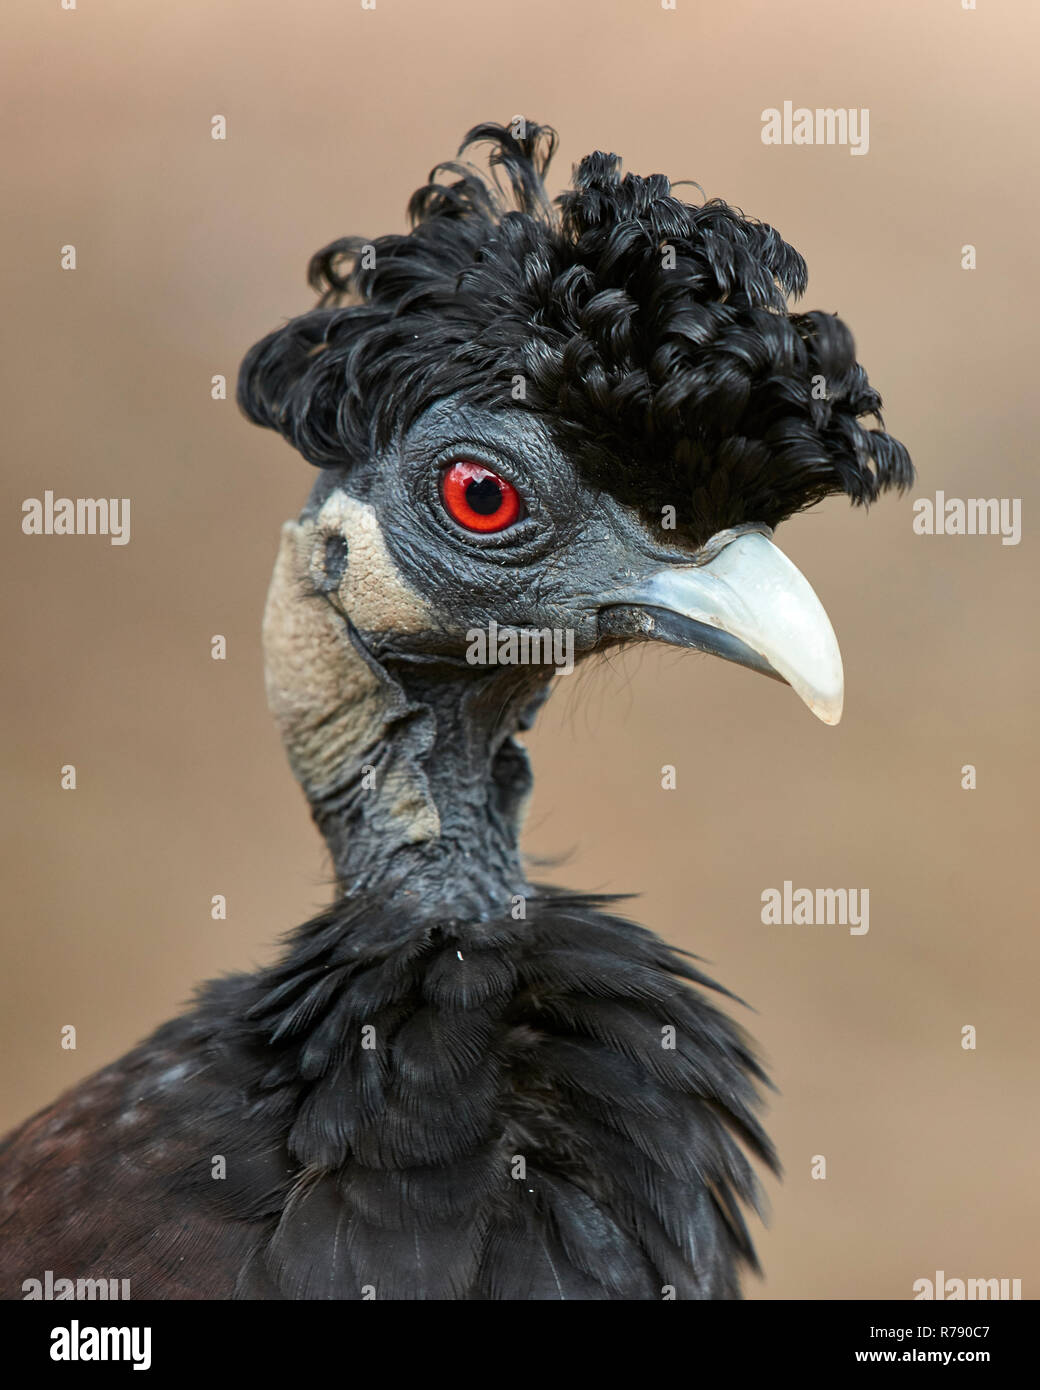 Crested Guineafowl (Guttera pucherani) - portrait showing crest of curly black feathers on the crown of its head Stock Photo